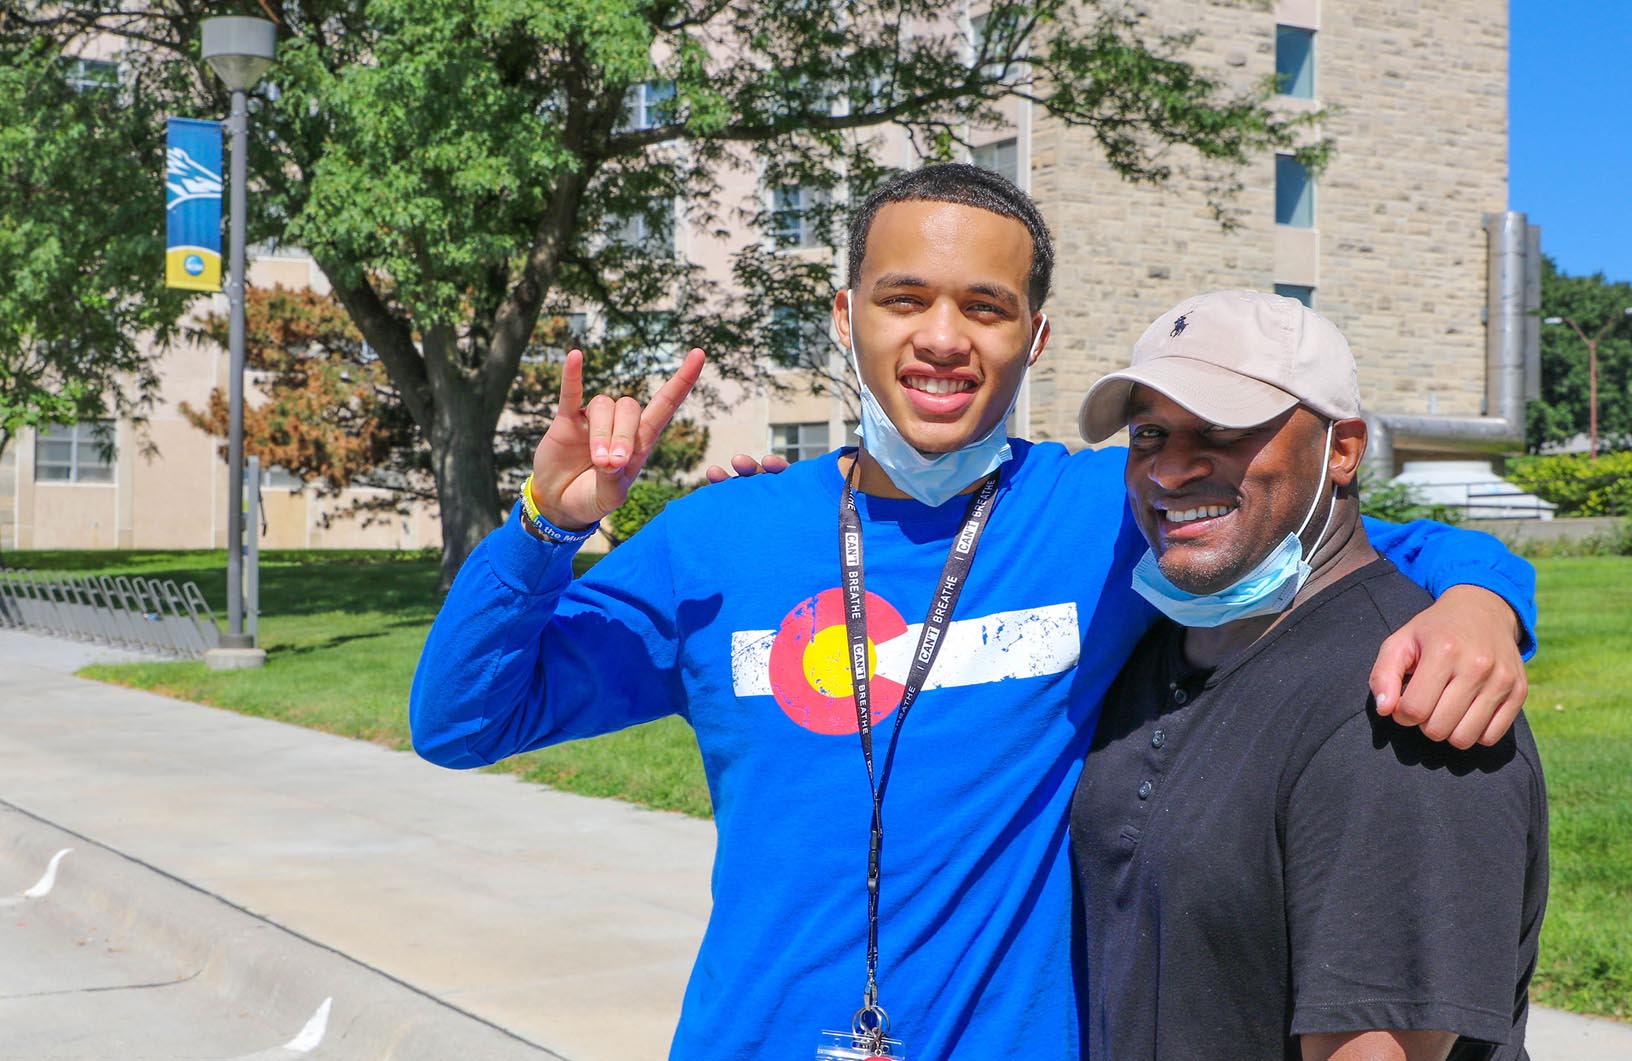 Freshman Matthew Robinson of Colorado Springs, Colorado, left, poses for a photo with his father Michael on the UNK campus. Robinson, who will study business administration, is attending UNK on a football scholarship.